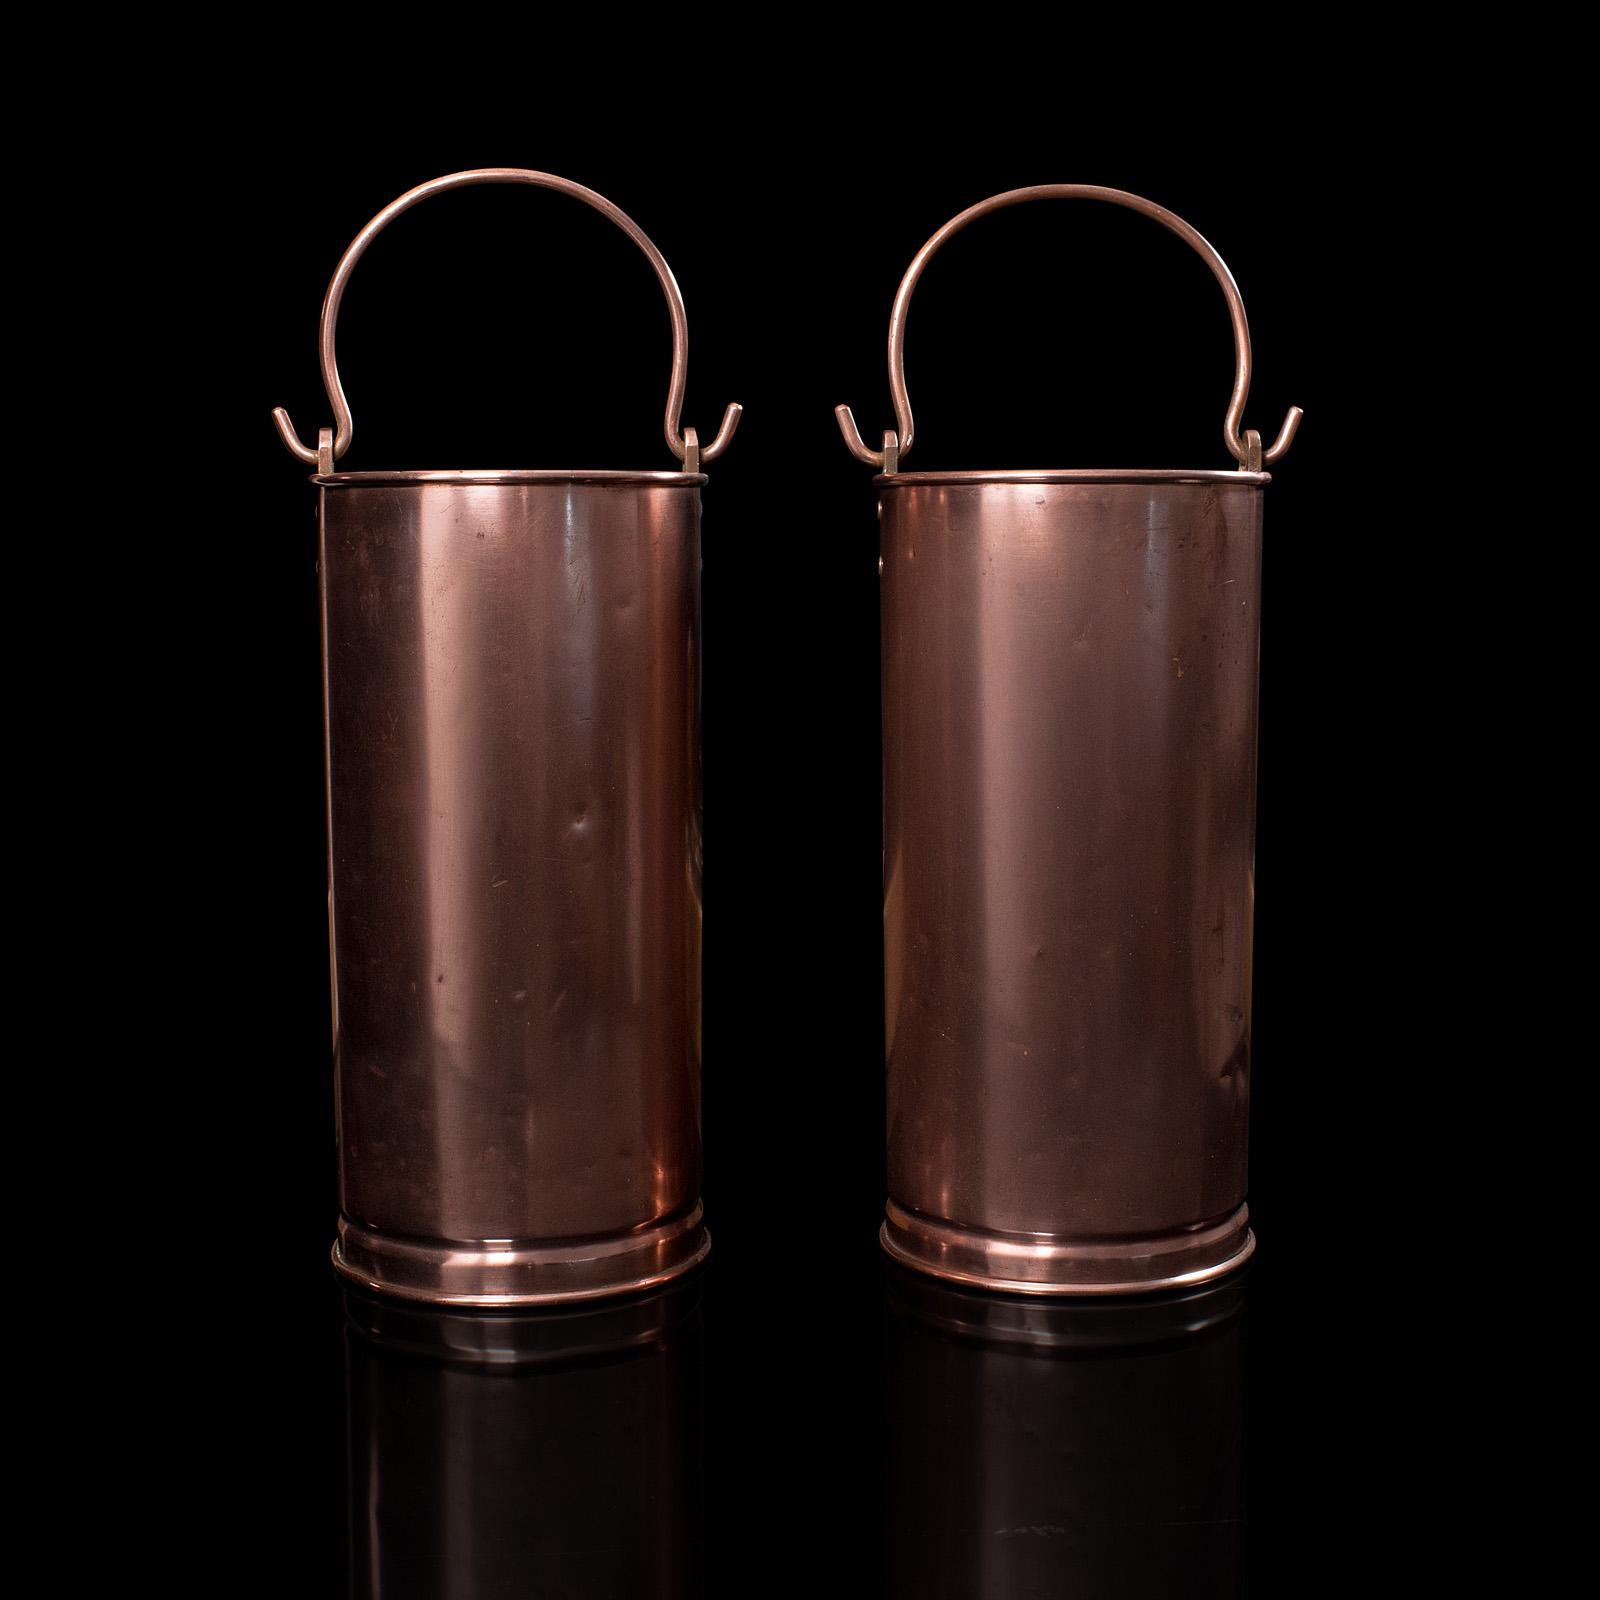 This is a pair of antique stick stands. An English, copper hallway bucket, dating to the early Victorian period, circa 1850.

Attractive tonality and of generous proportion
Displays a desirable aged patina throughout
Hand-rolled copper presents